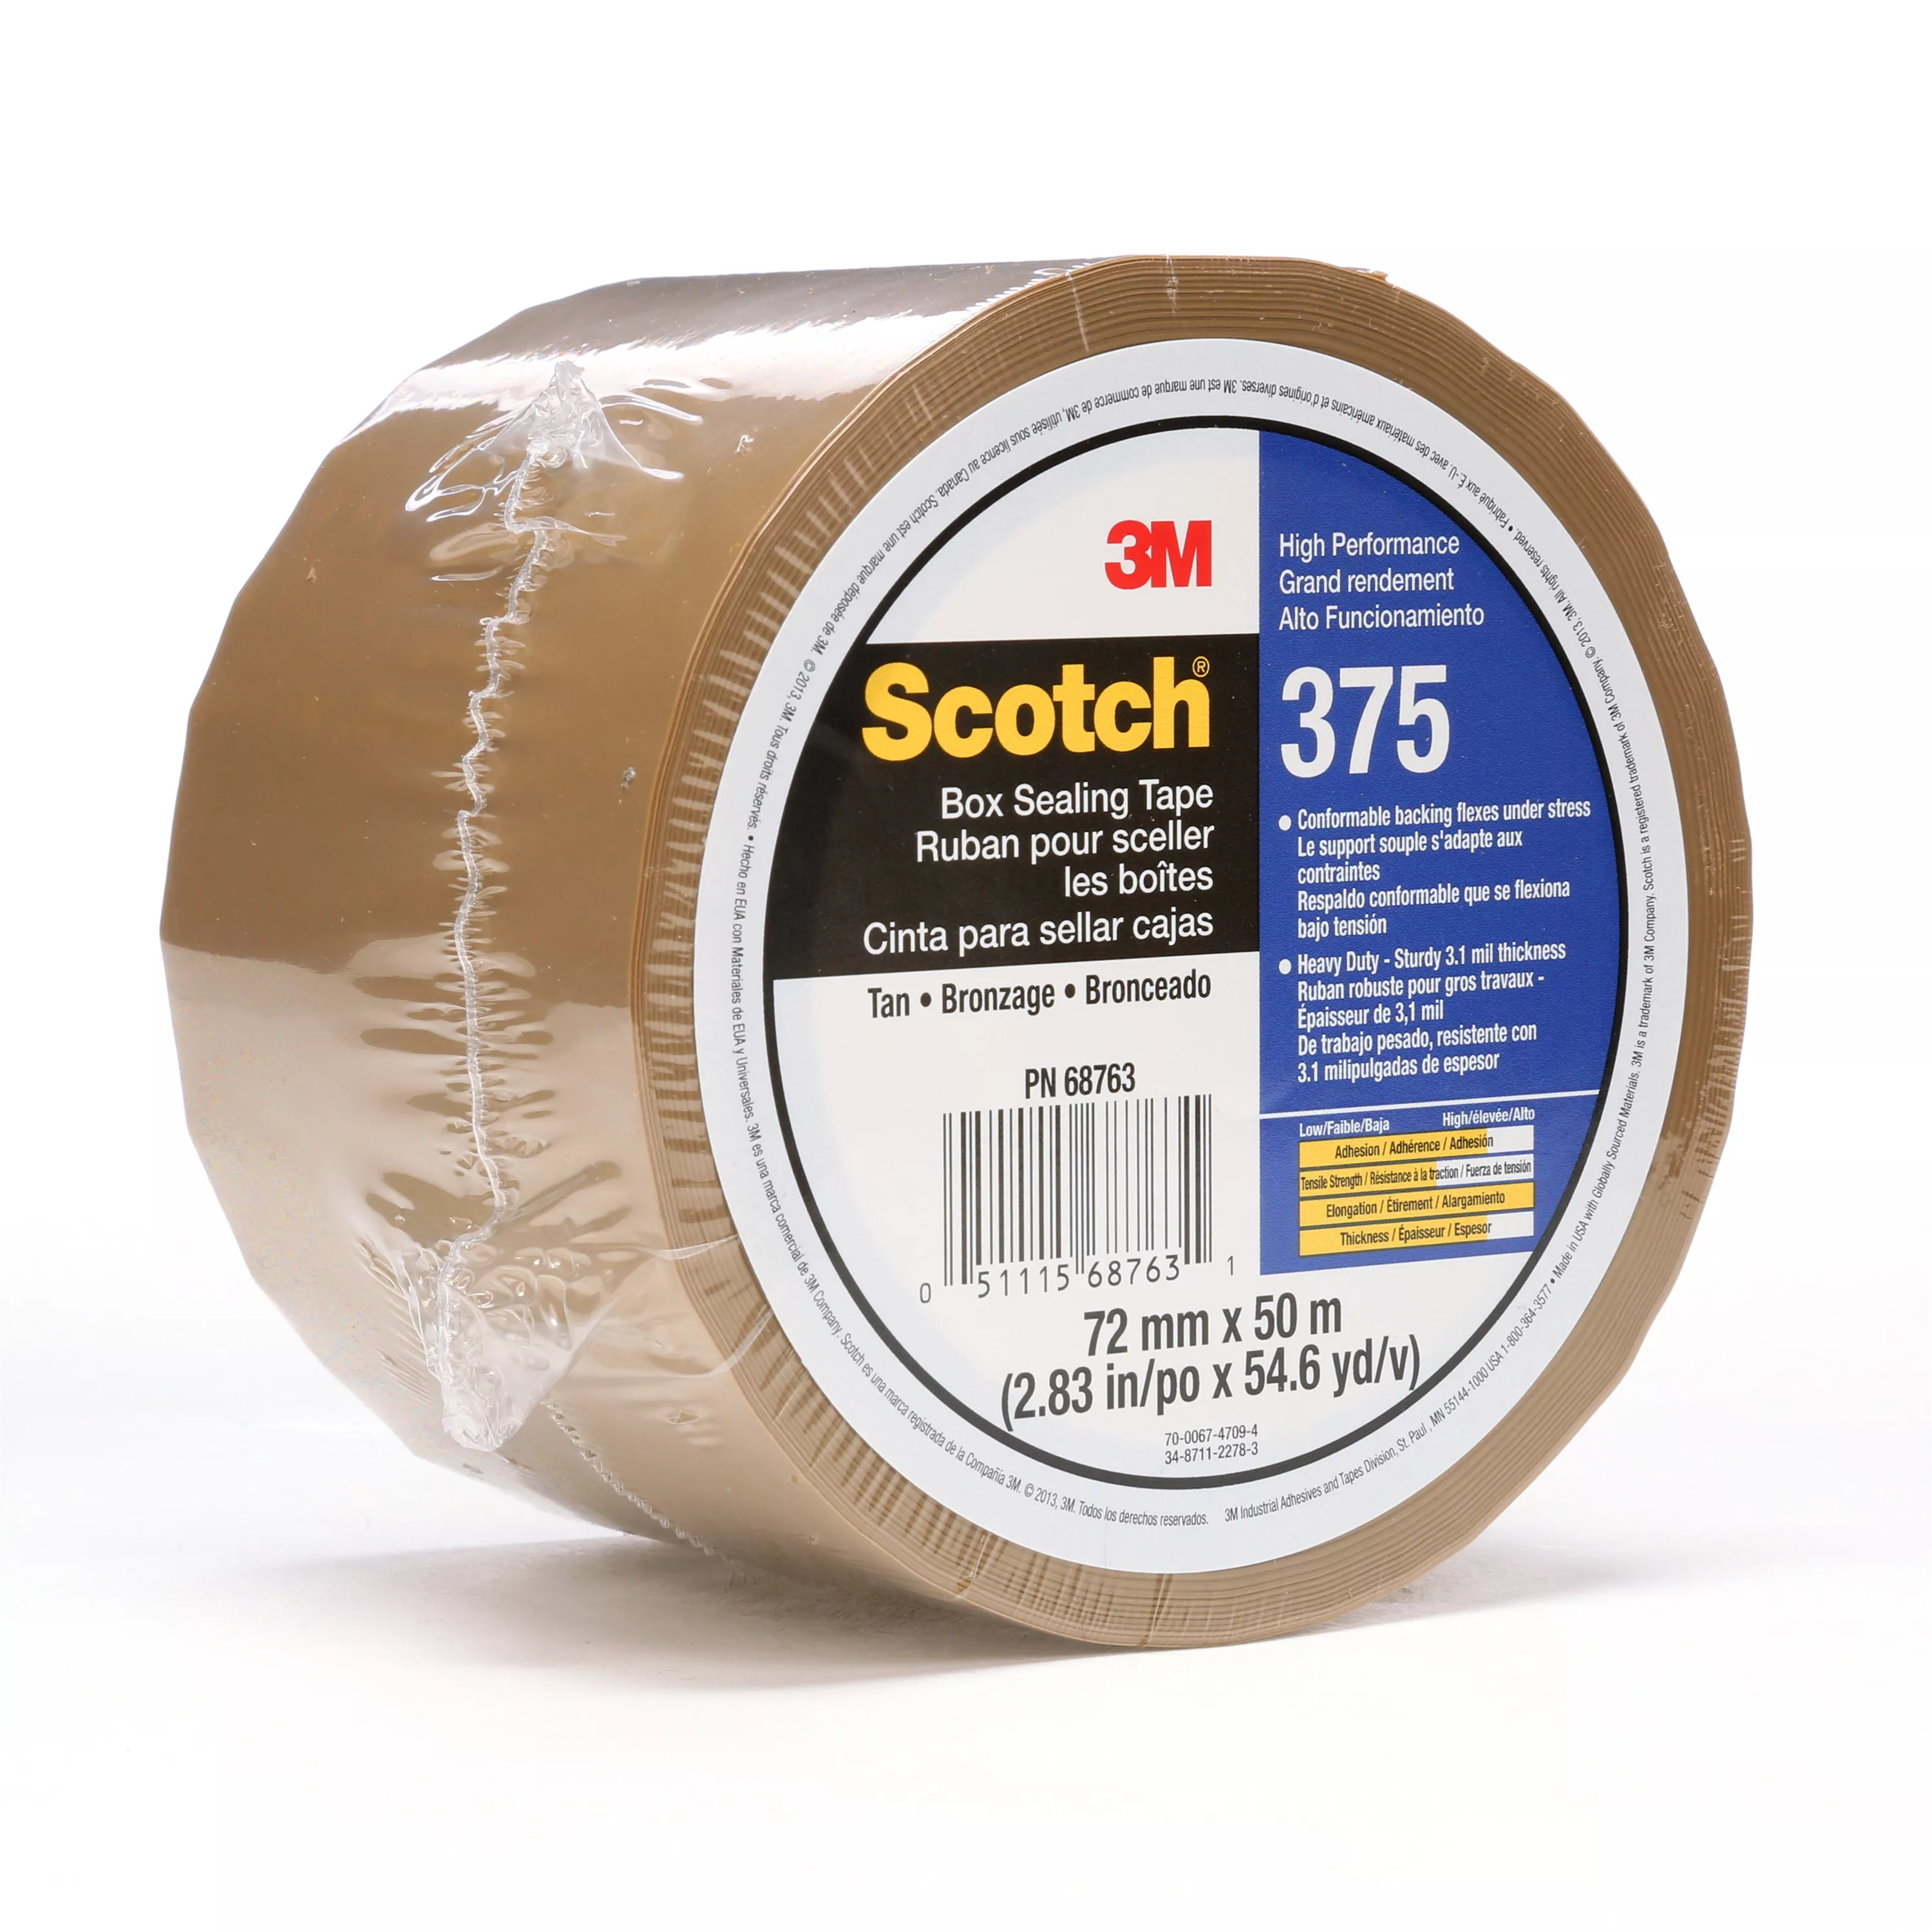 Scotch® Box Sealing Tape 375, Tan, 72 mm x 50 m, 24/Case, Individually
Wrapped Conveniently Packaged